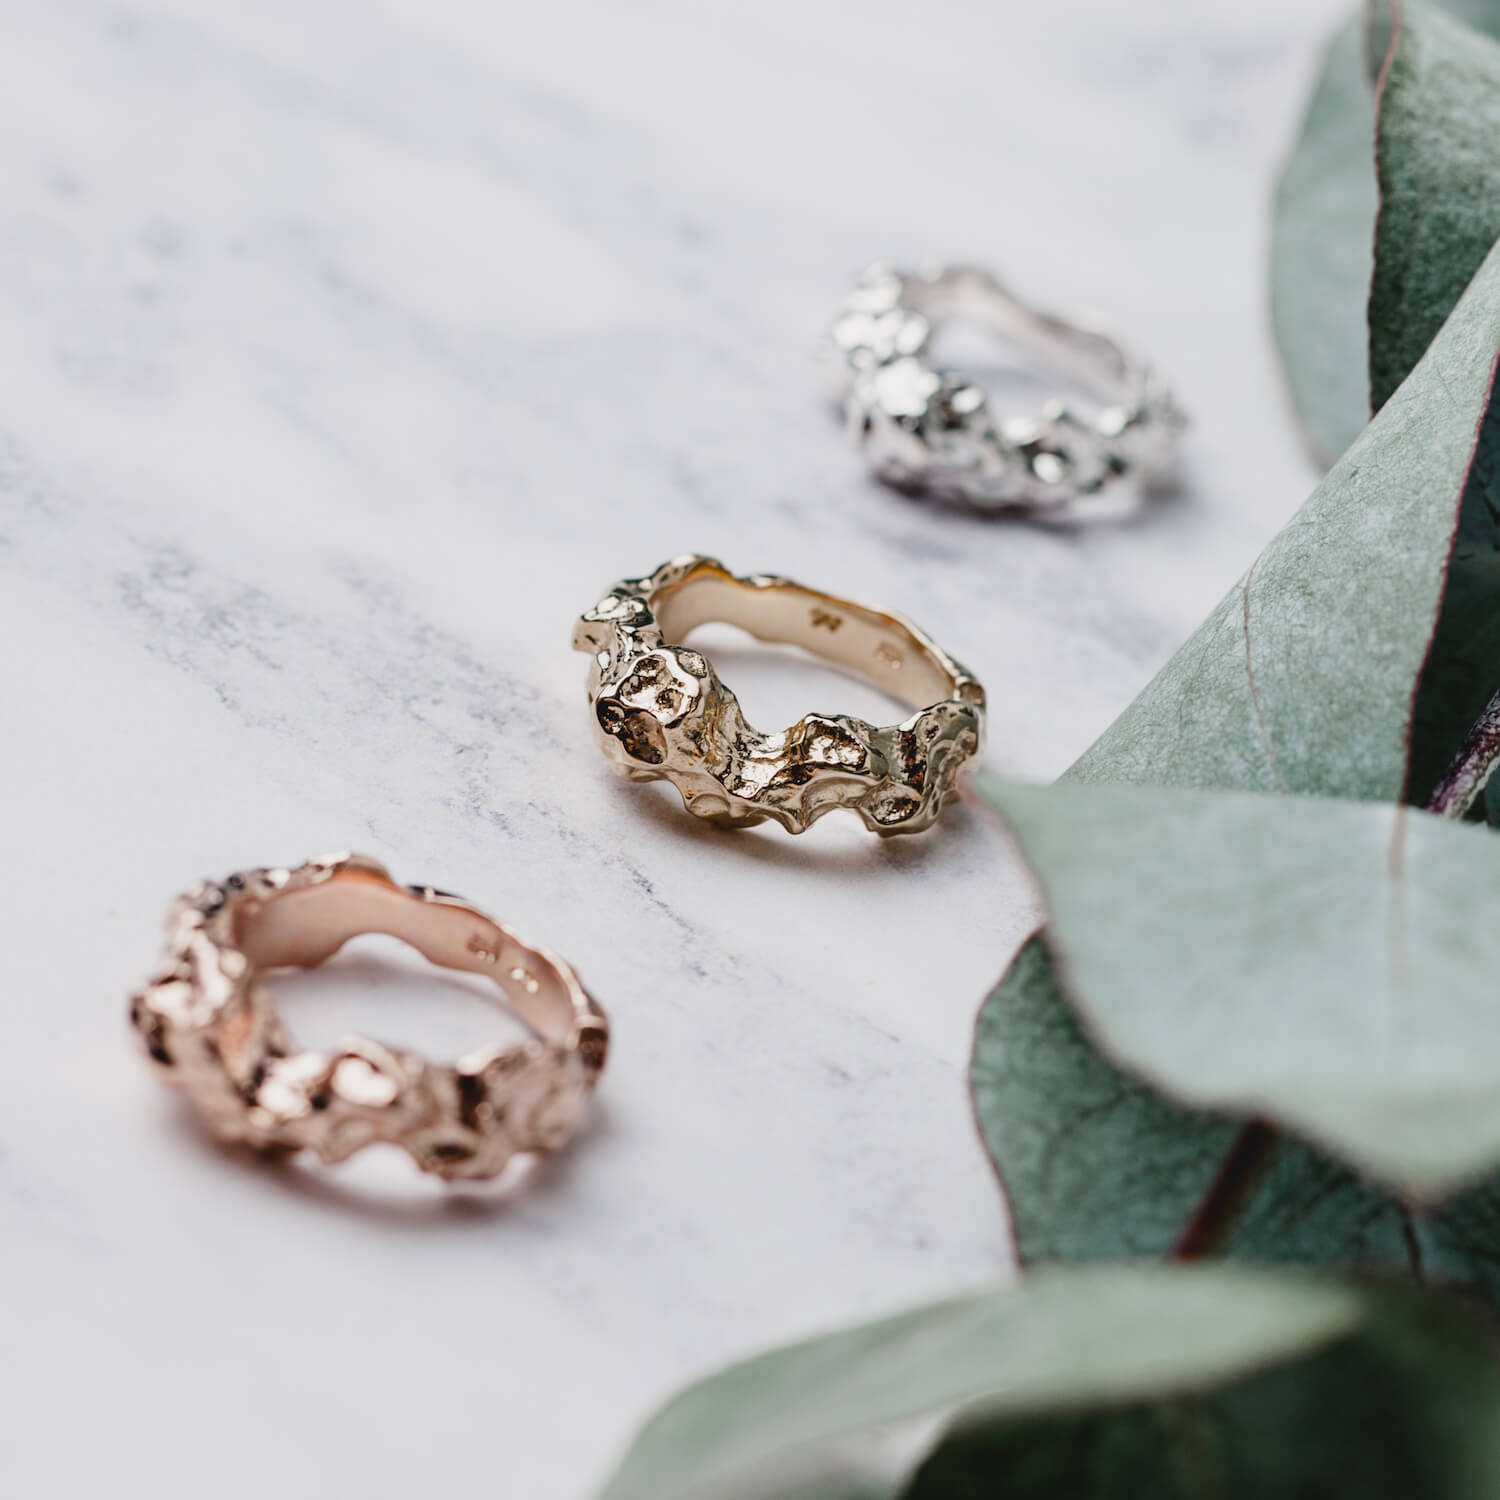 Three rings next to each other, one in silver, one in gold and one in rose gold